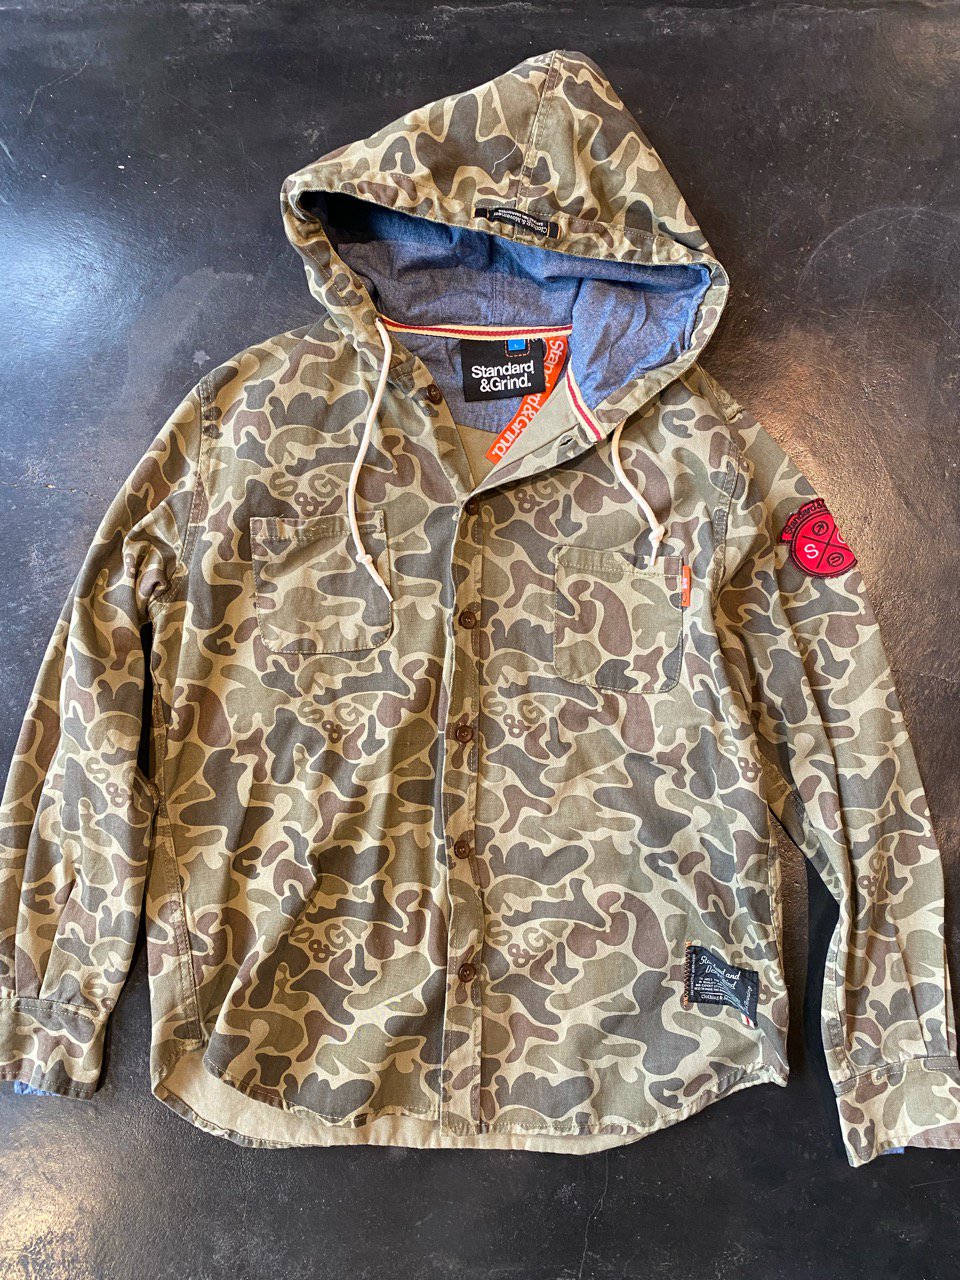 ARMY COTTON HOODIE SHIRTS -USED- MEN'S L 